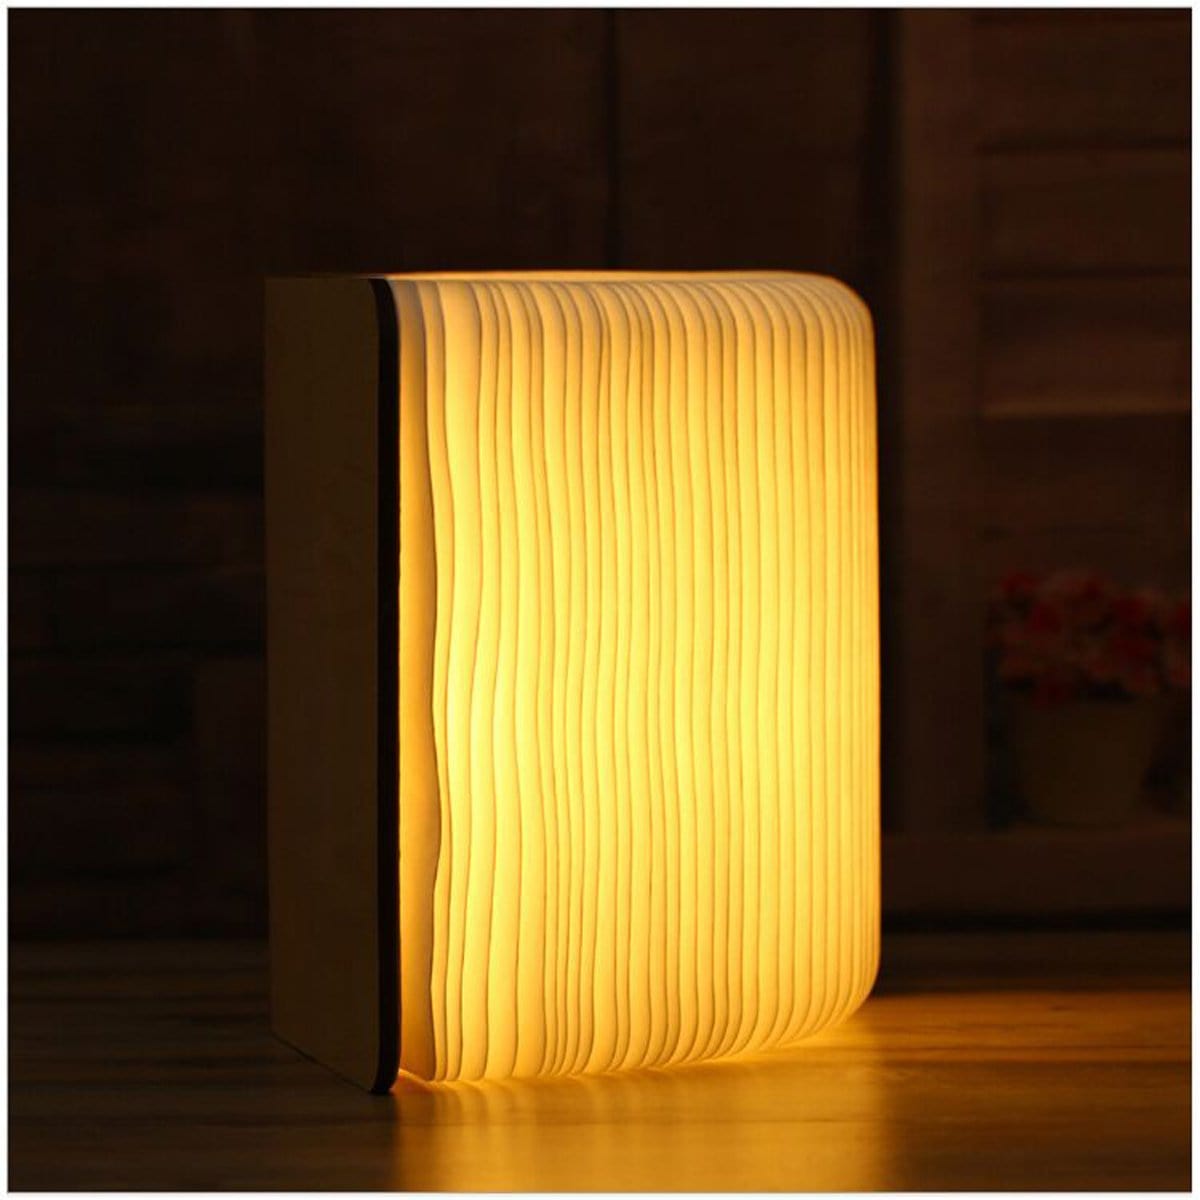 Book Lamp To My Bestie - We Have Been Friends For Go Long LED Folding Book Light GiveMe-Gifts